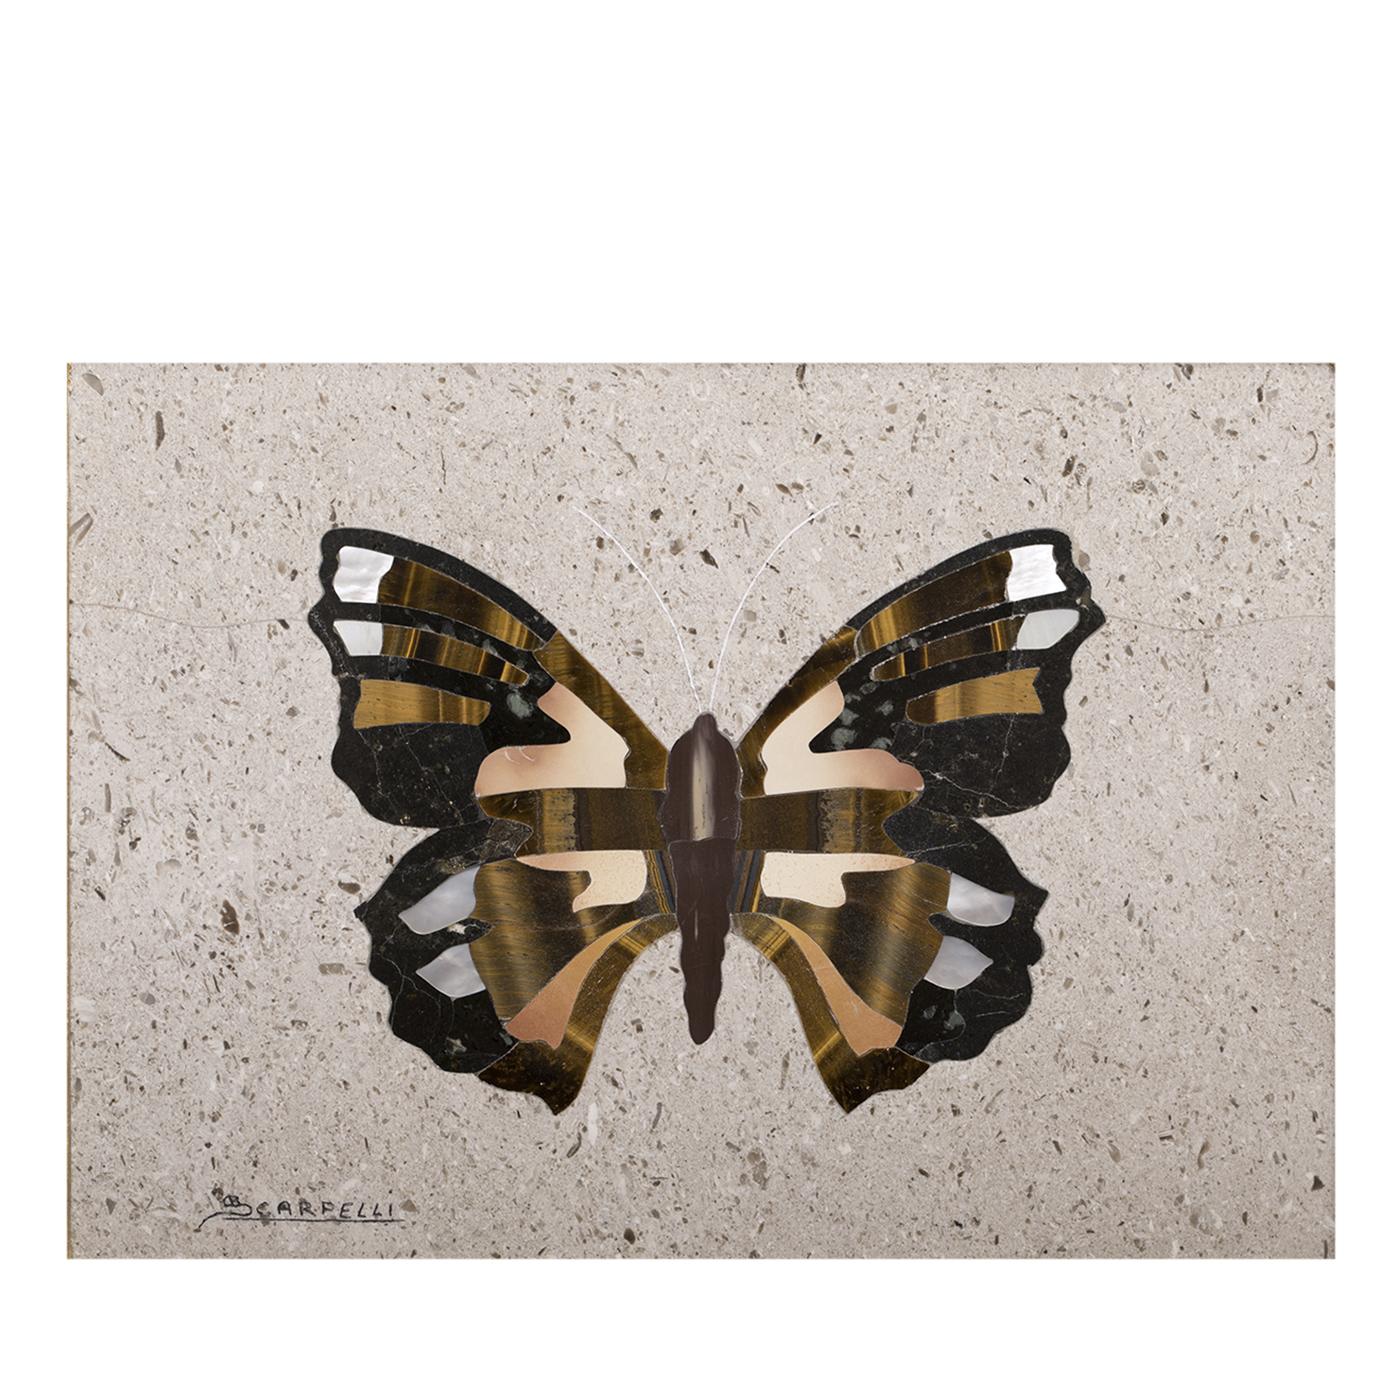 Inserts of tiger's eye and mother of pearl are gracefully set against light-colored rich marble to create a picture depicting a blue butterfly. Accentuated with mother of pearl, the mosaic is inlaid by Florentine master marble artists Scarpelli